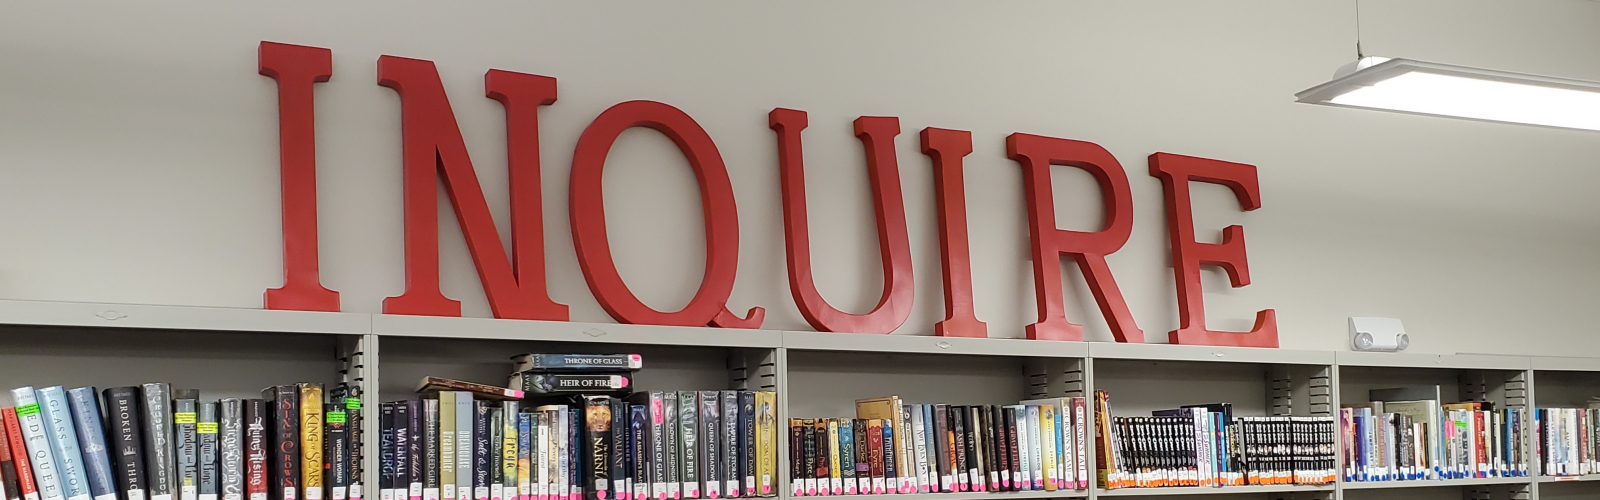 The word "Inquire" in red over a full bookshelf